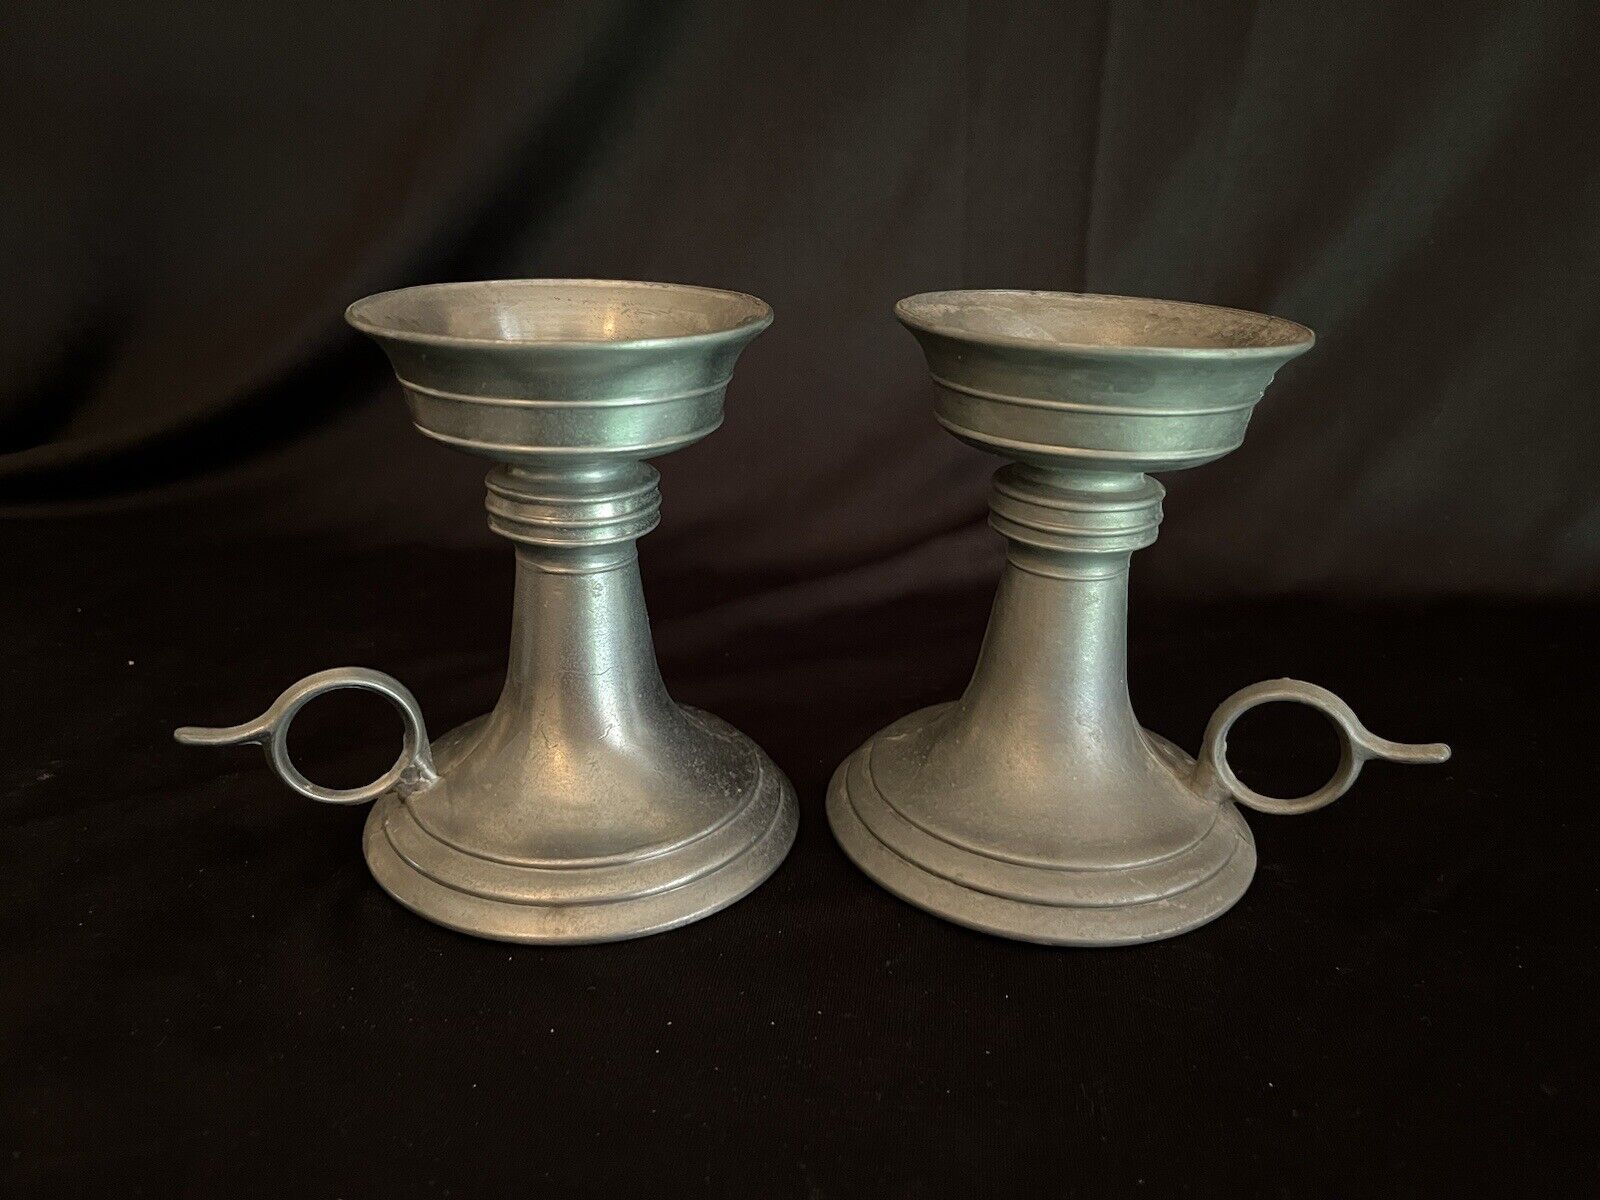 Pair of Norleans Metal Pewter-Like Pillar Candle Holders, Handmade in Italy